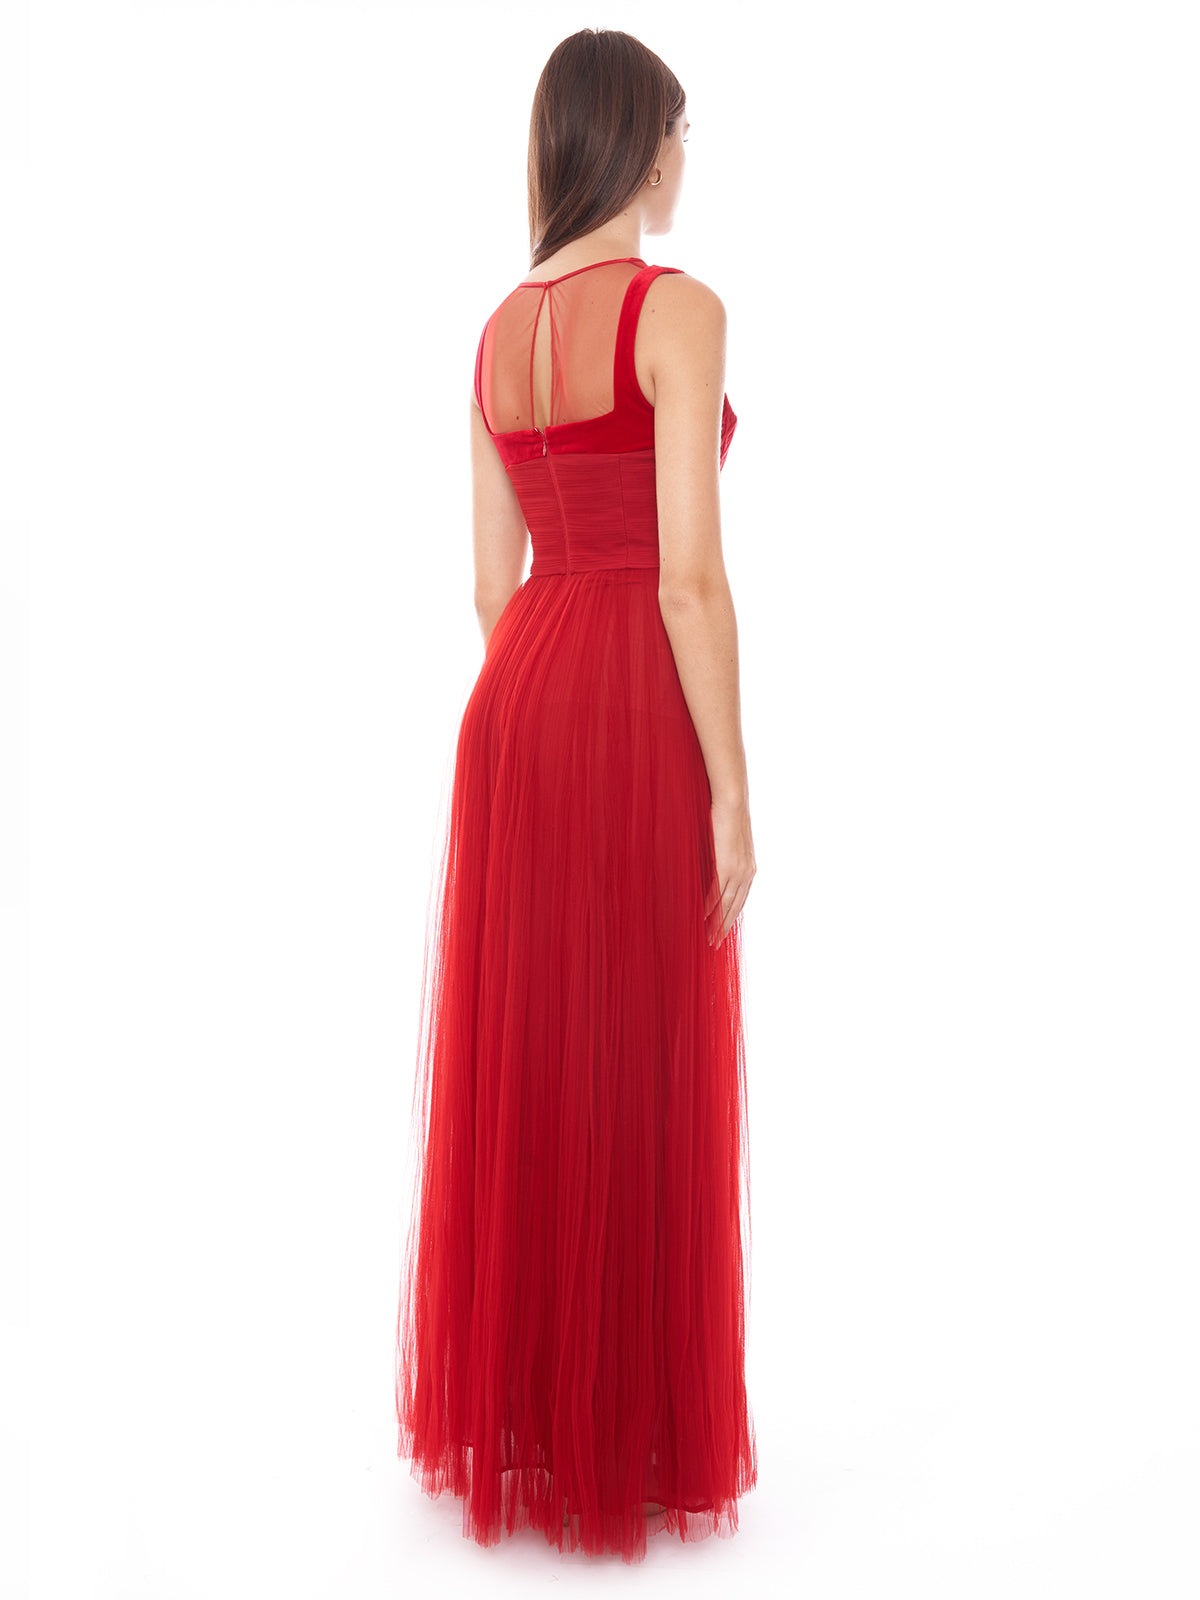 Red carpet dress with embroidered velvet bodice by Elisabetta Franchi